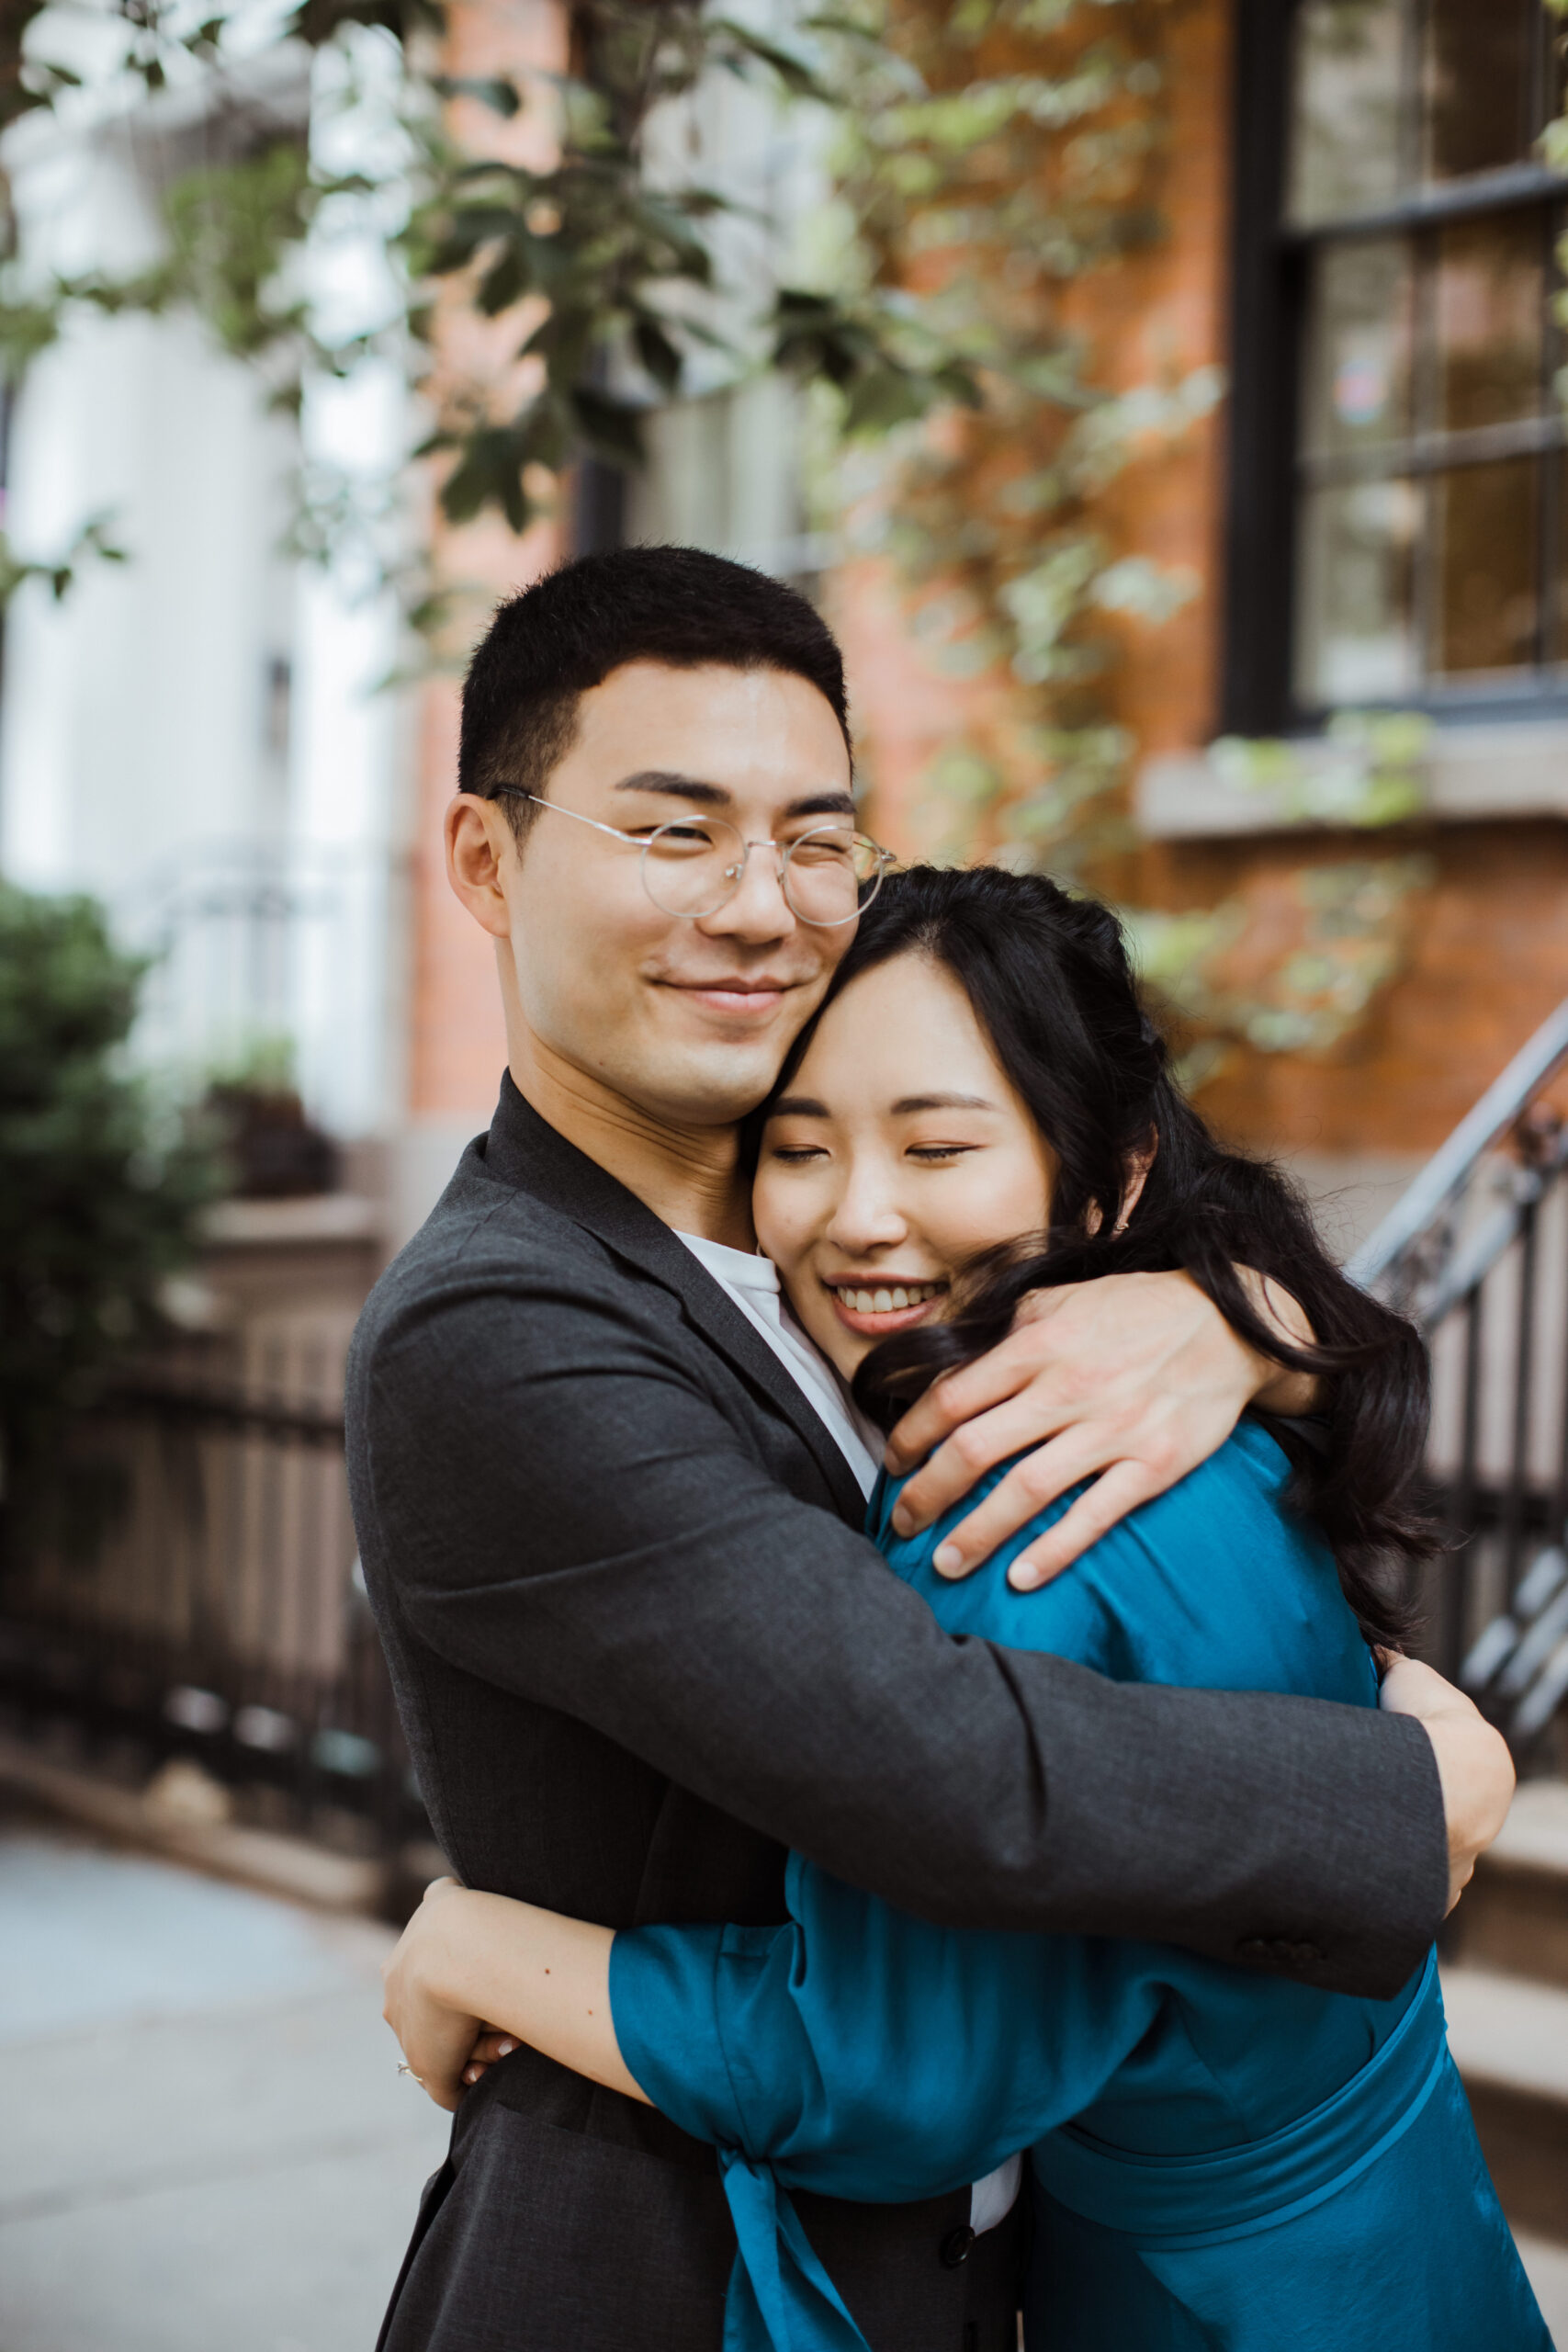 Beautiful couple embrace each other during their New York engagement session